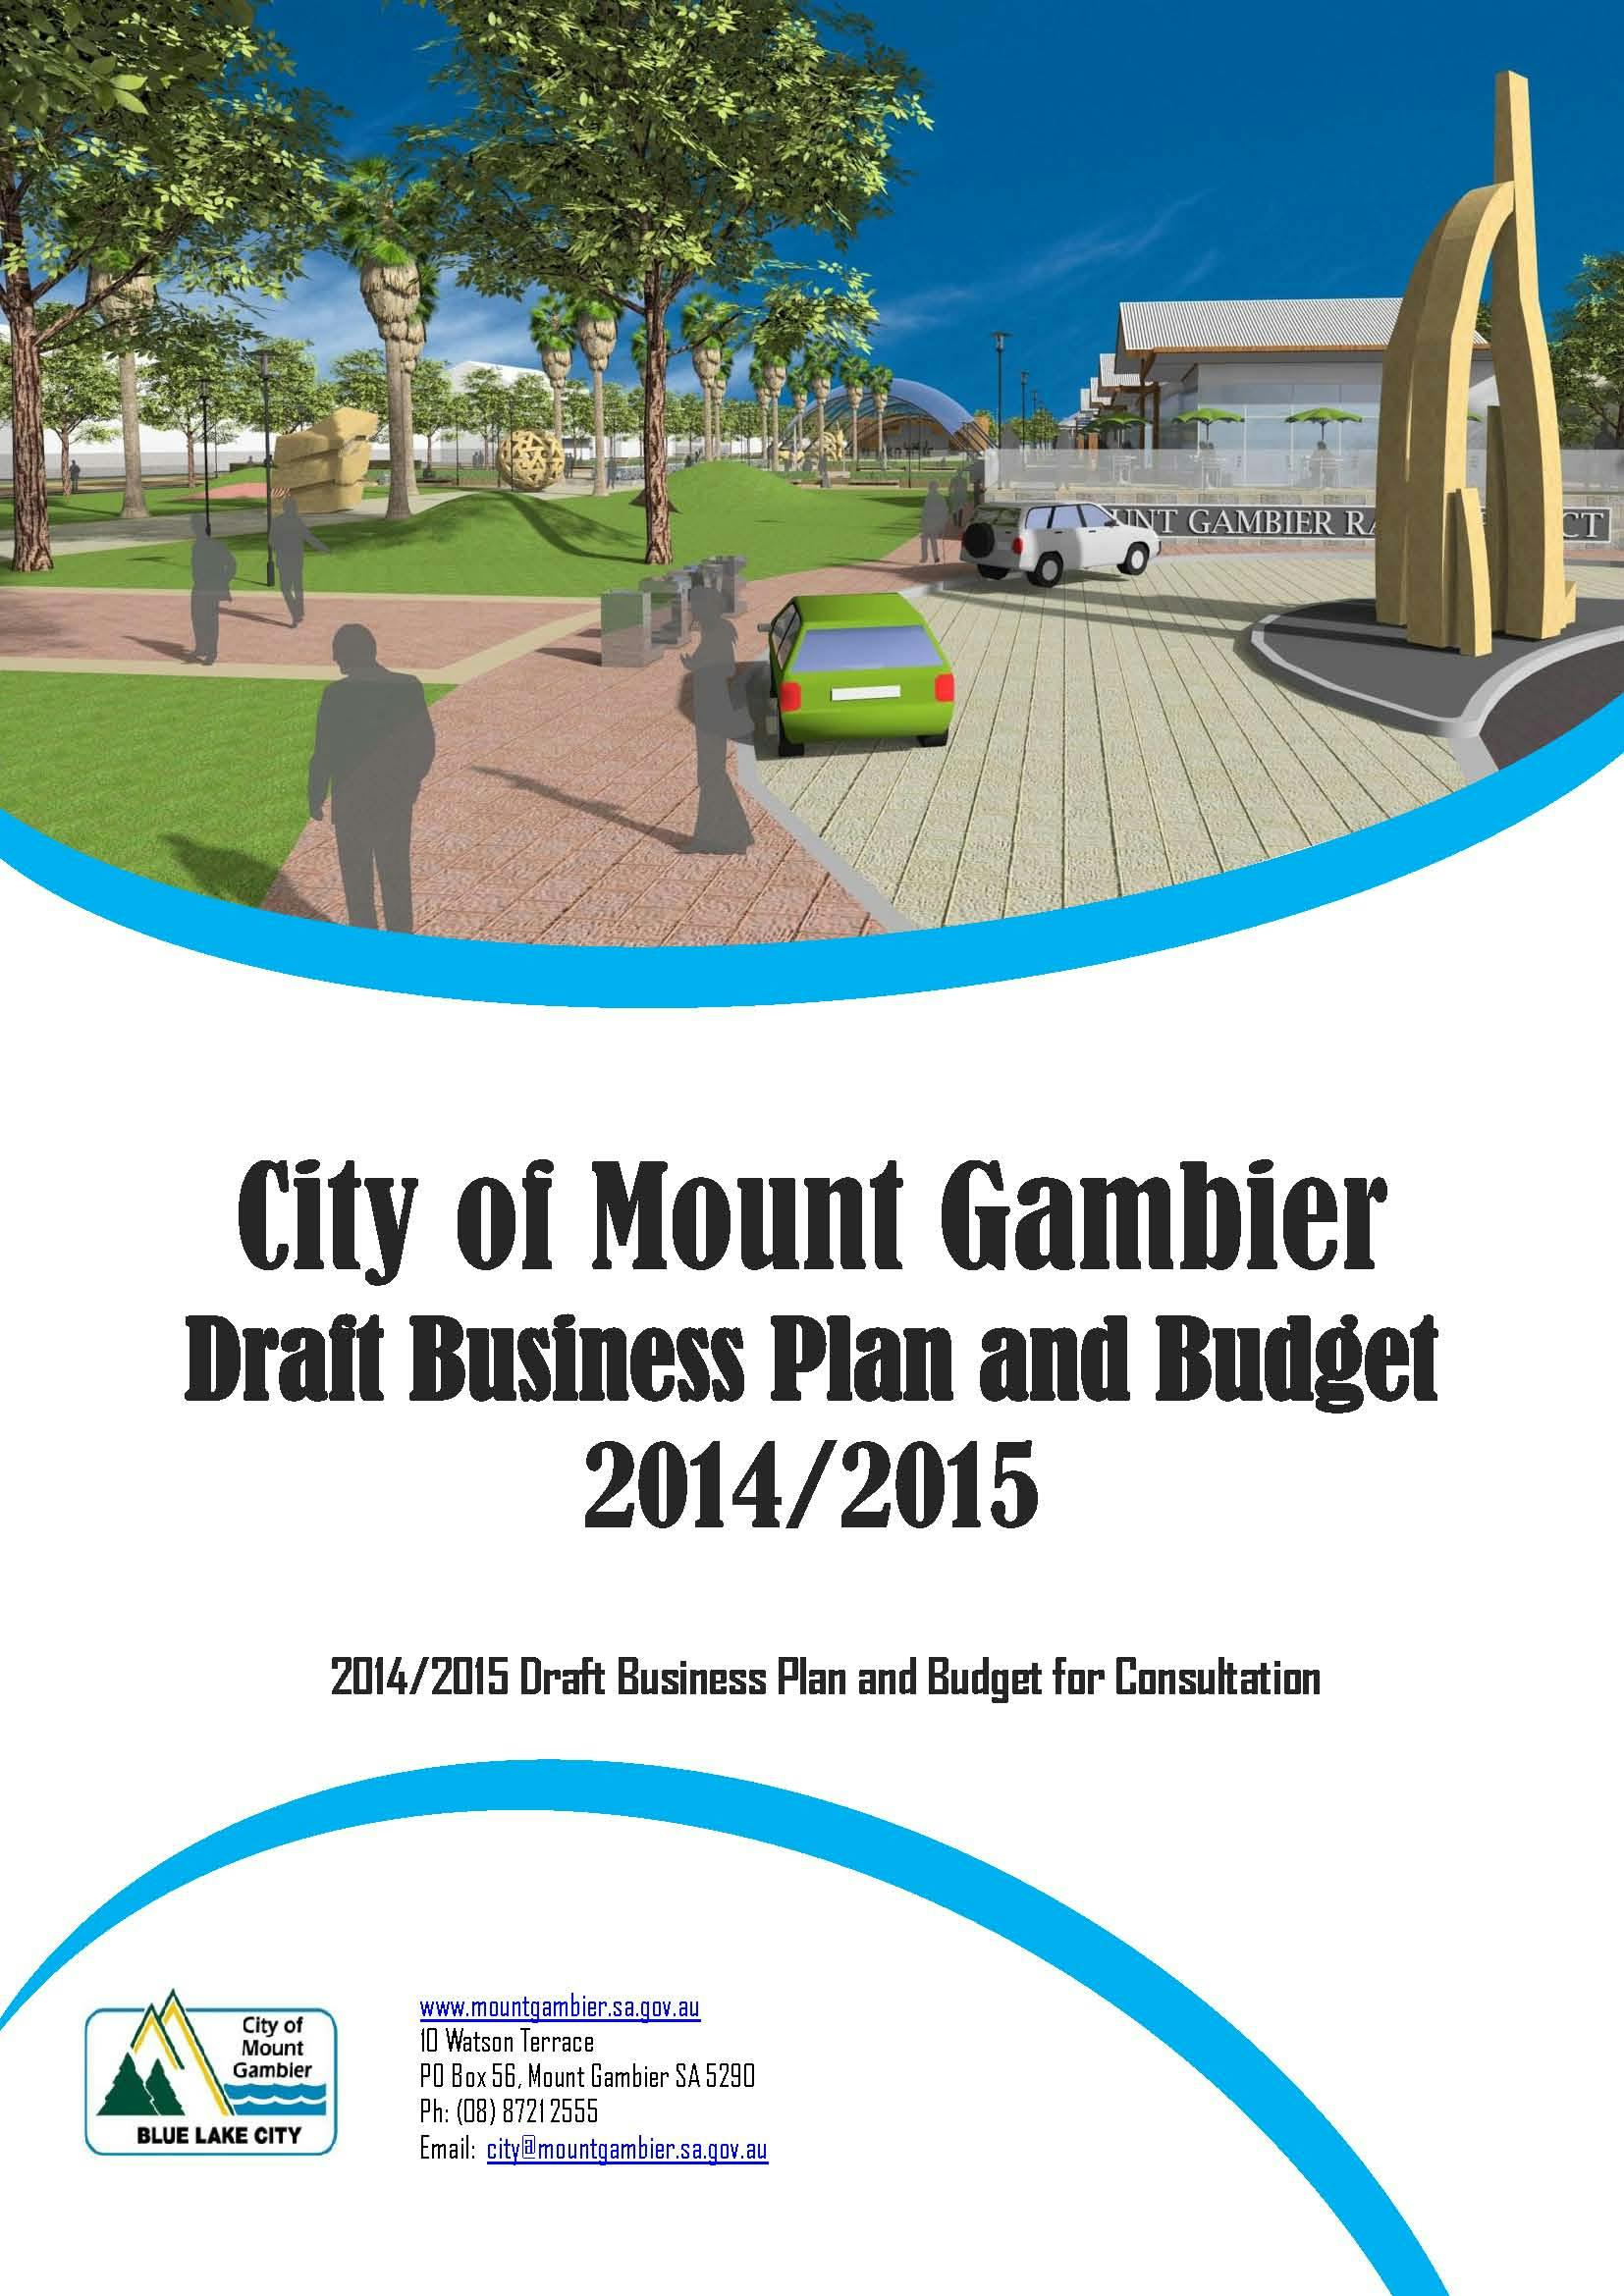 2014/15 Draft Business Plan And Budget